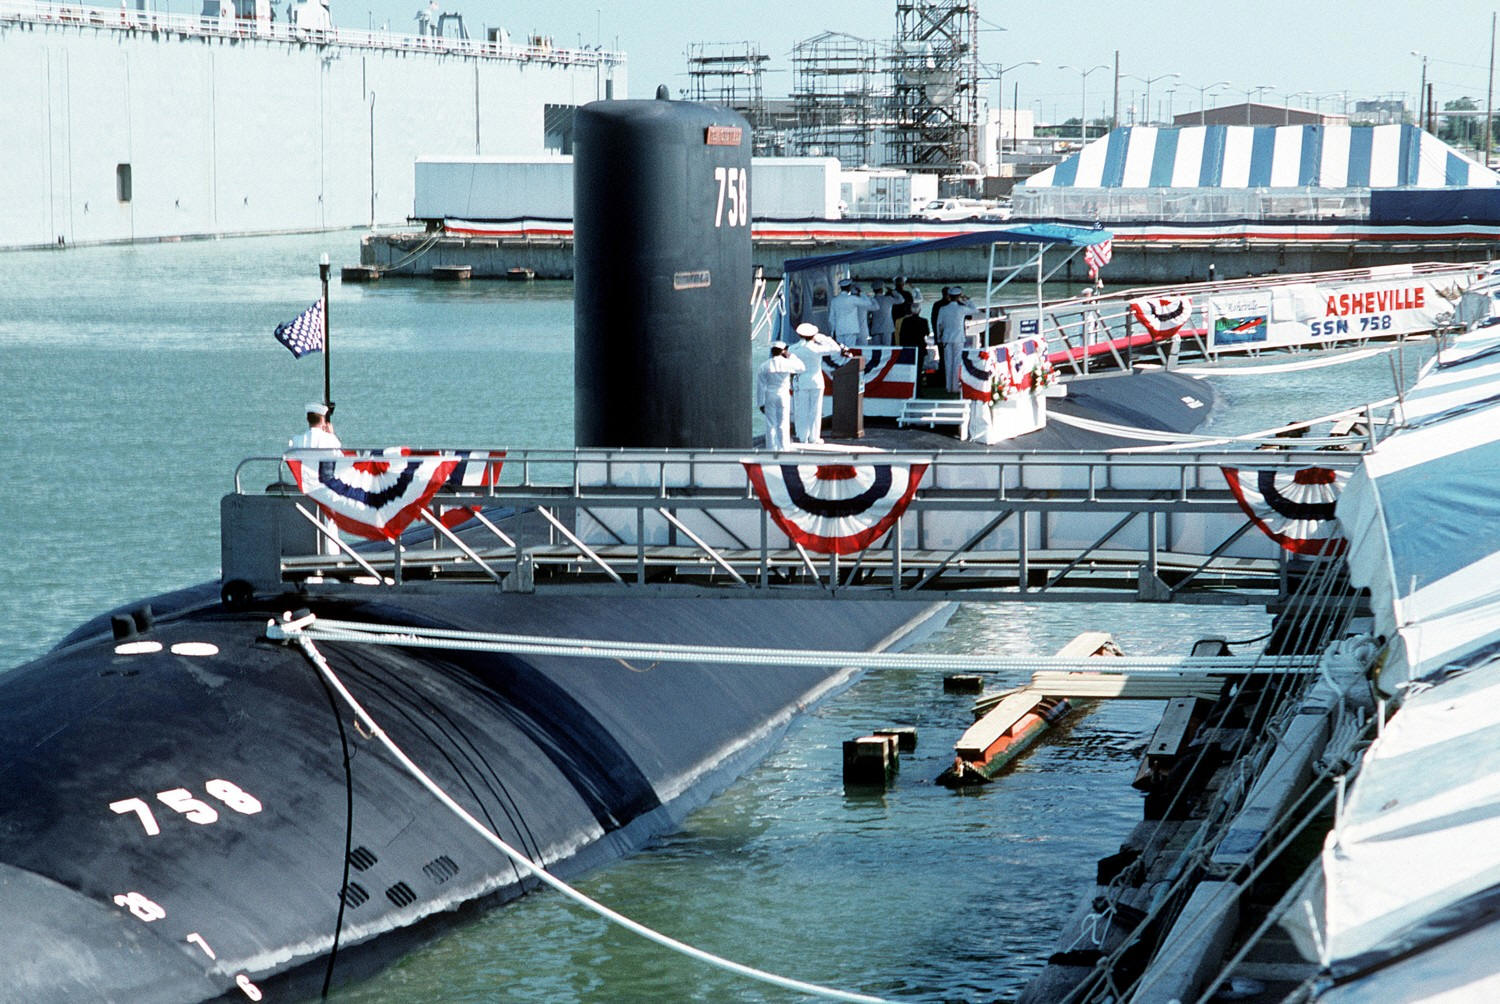 ssn-758 uss asheville commissioning ceremony september 1991